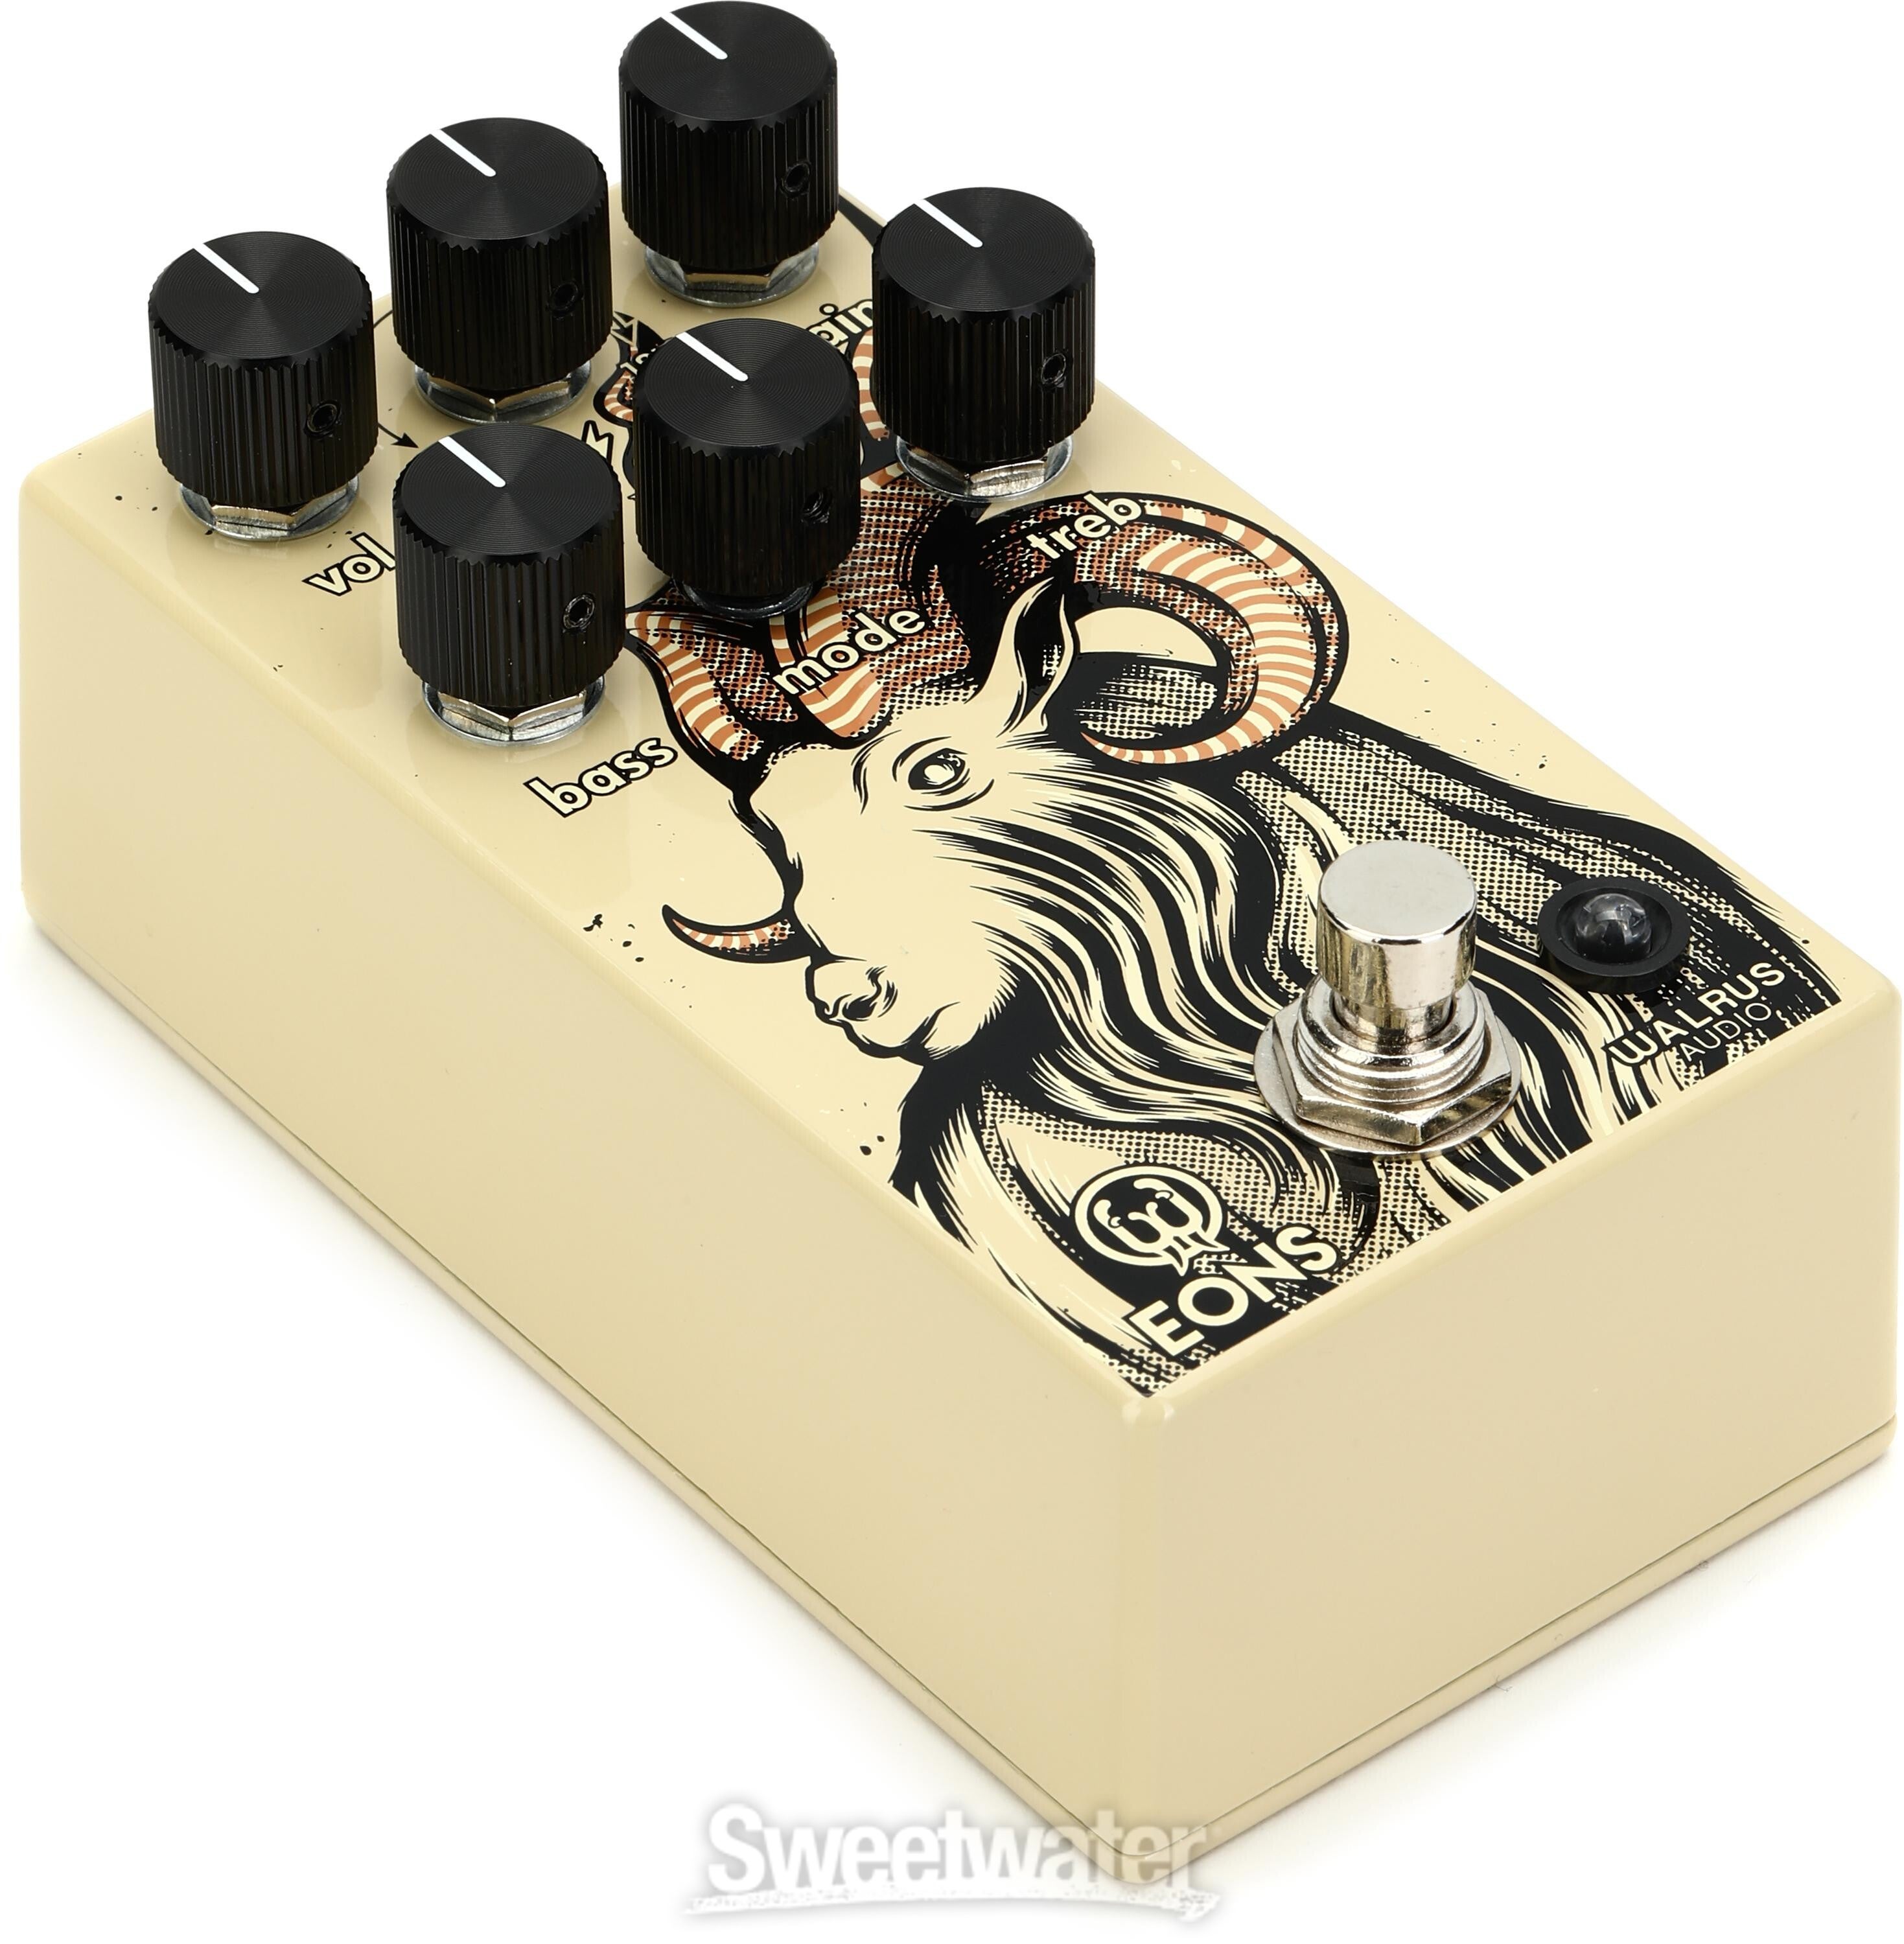 Walrus Audio Eons 5-state Fuzz Pedal | Sweetwater